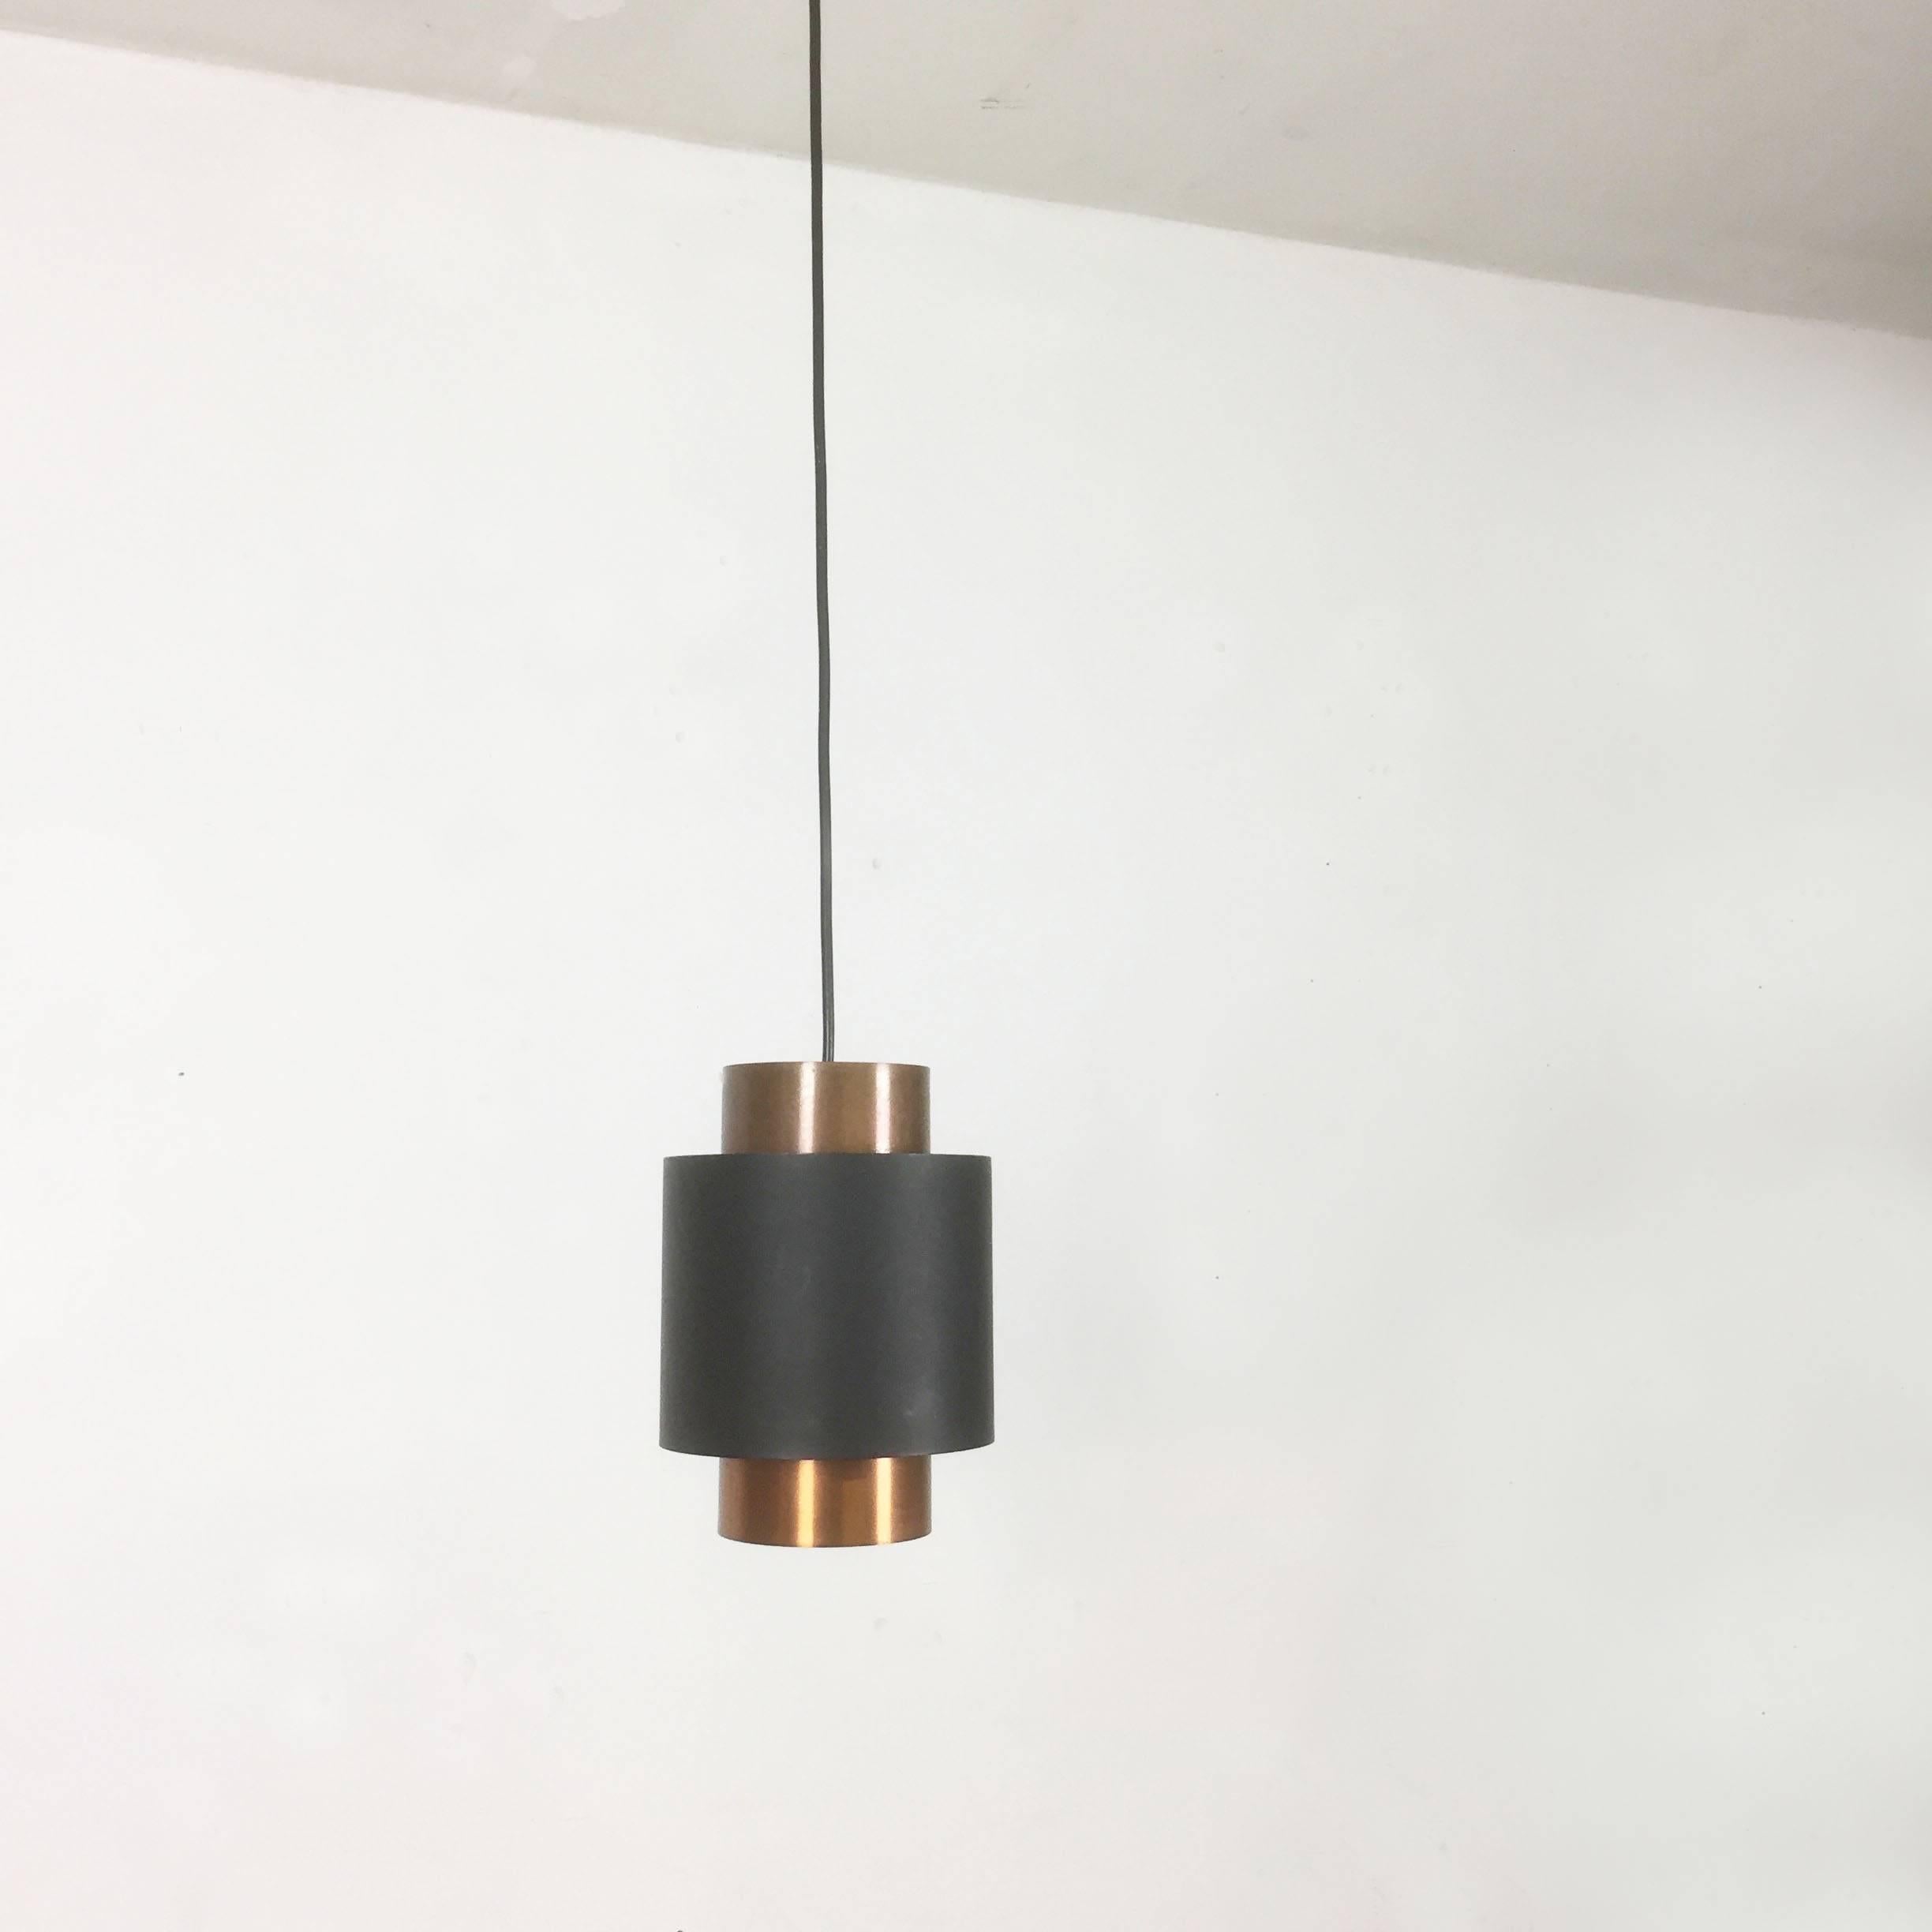 Article:

hanging light


Producer:

Fog and Mørup, 1960s



Origin:

Denmark



Age:

1960s




Description:

This metal hanging light model “Tunika“ was designed by Jo Hammerborg for Fog and Mørup in 1968s. This light is